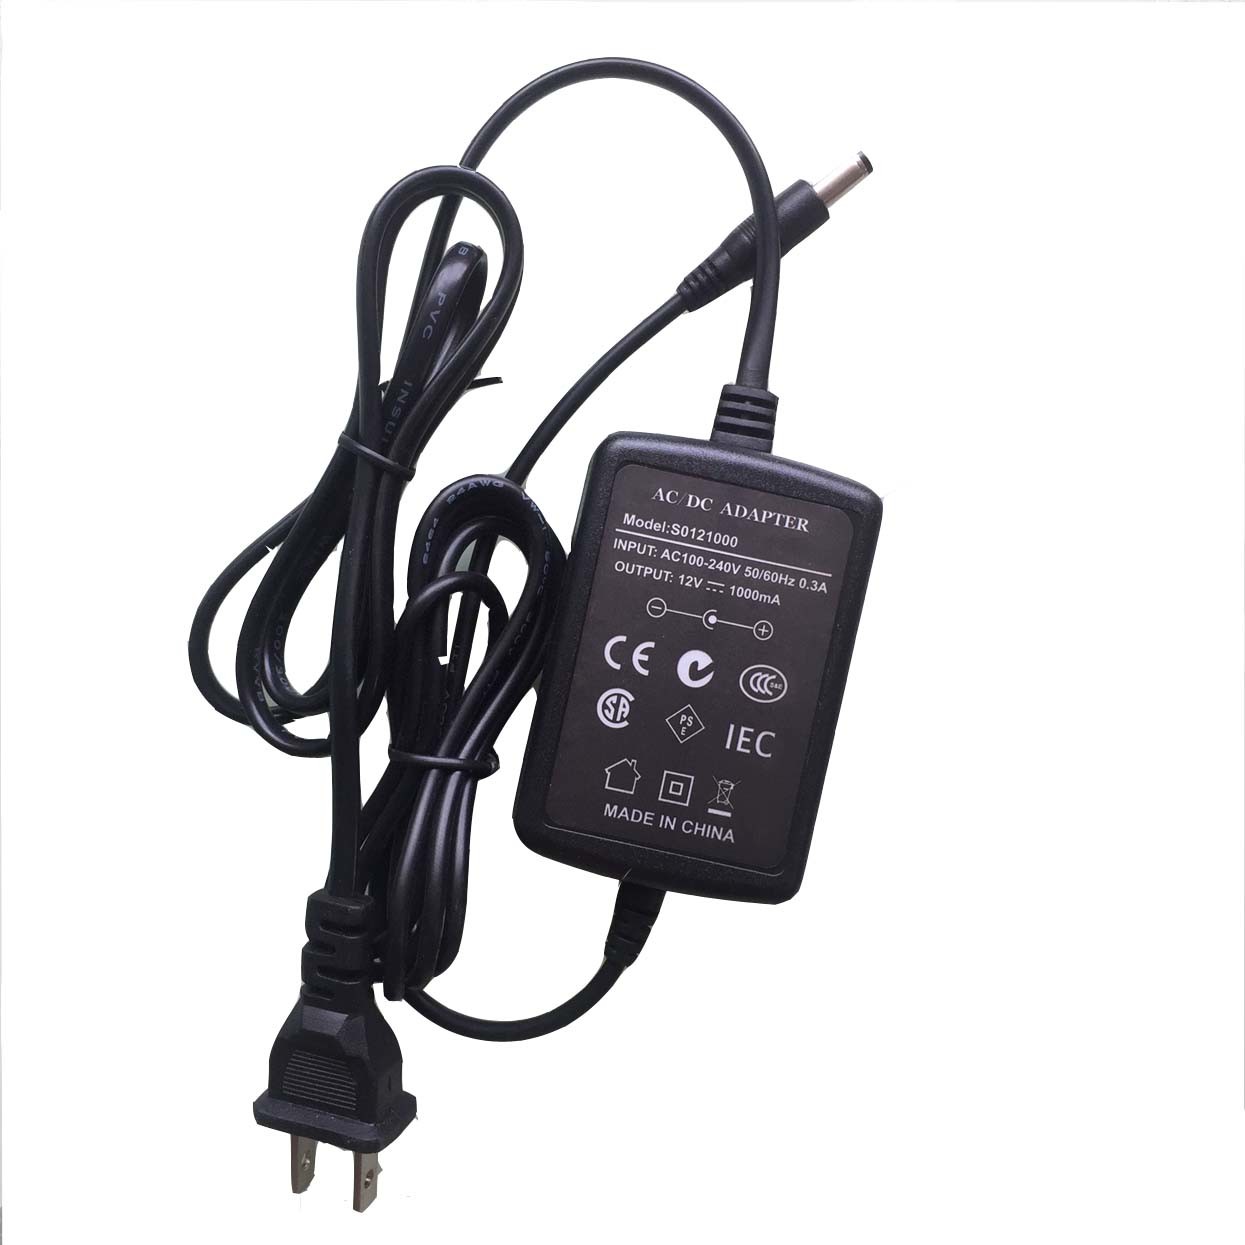 0USA-Plug-12V1a-12W-Laptop-AC-DC-Switching-Power-Adapter-with-Ce-CB-SAA-TUV-Certificate.jpg